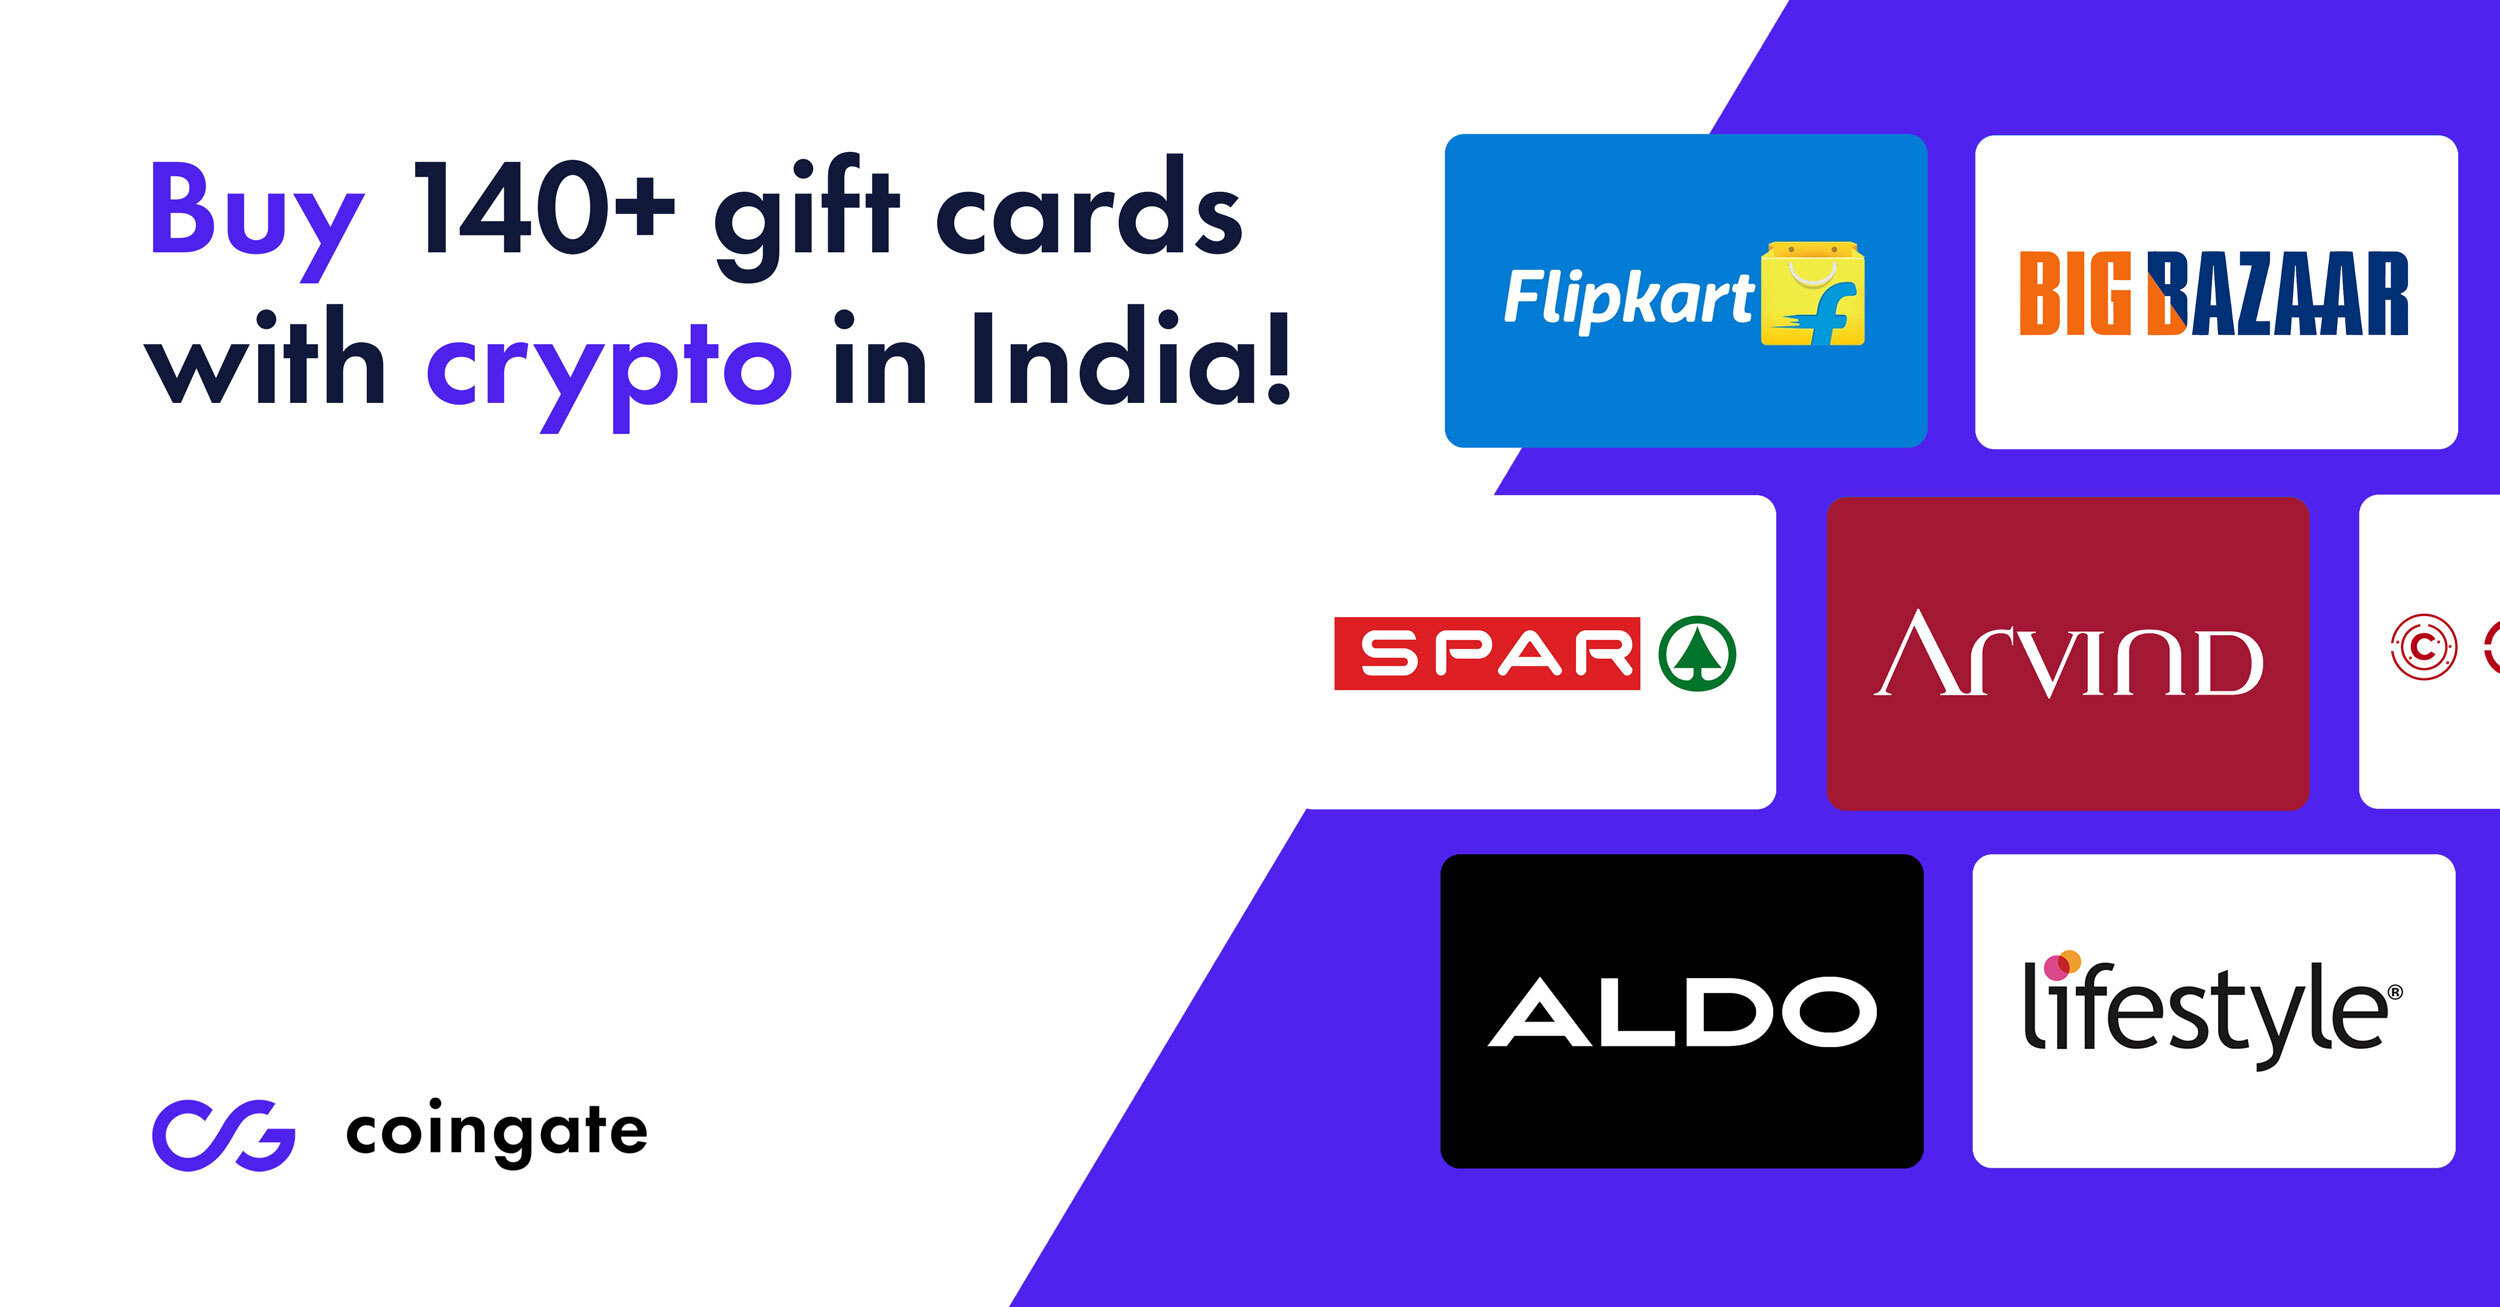 gift cards to buy with crypto in india